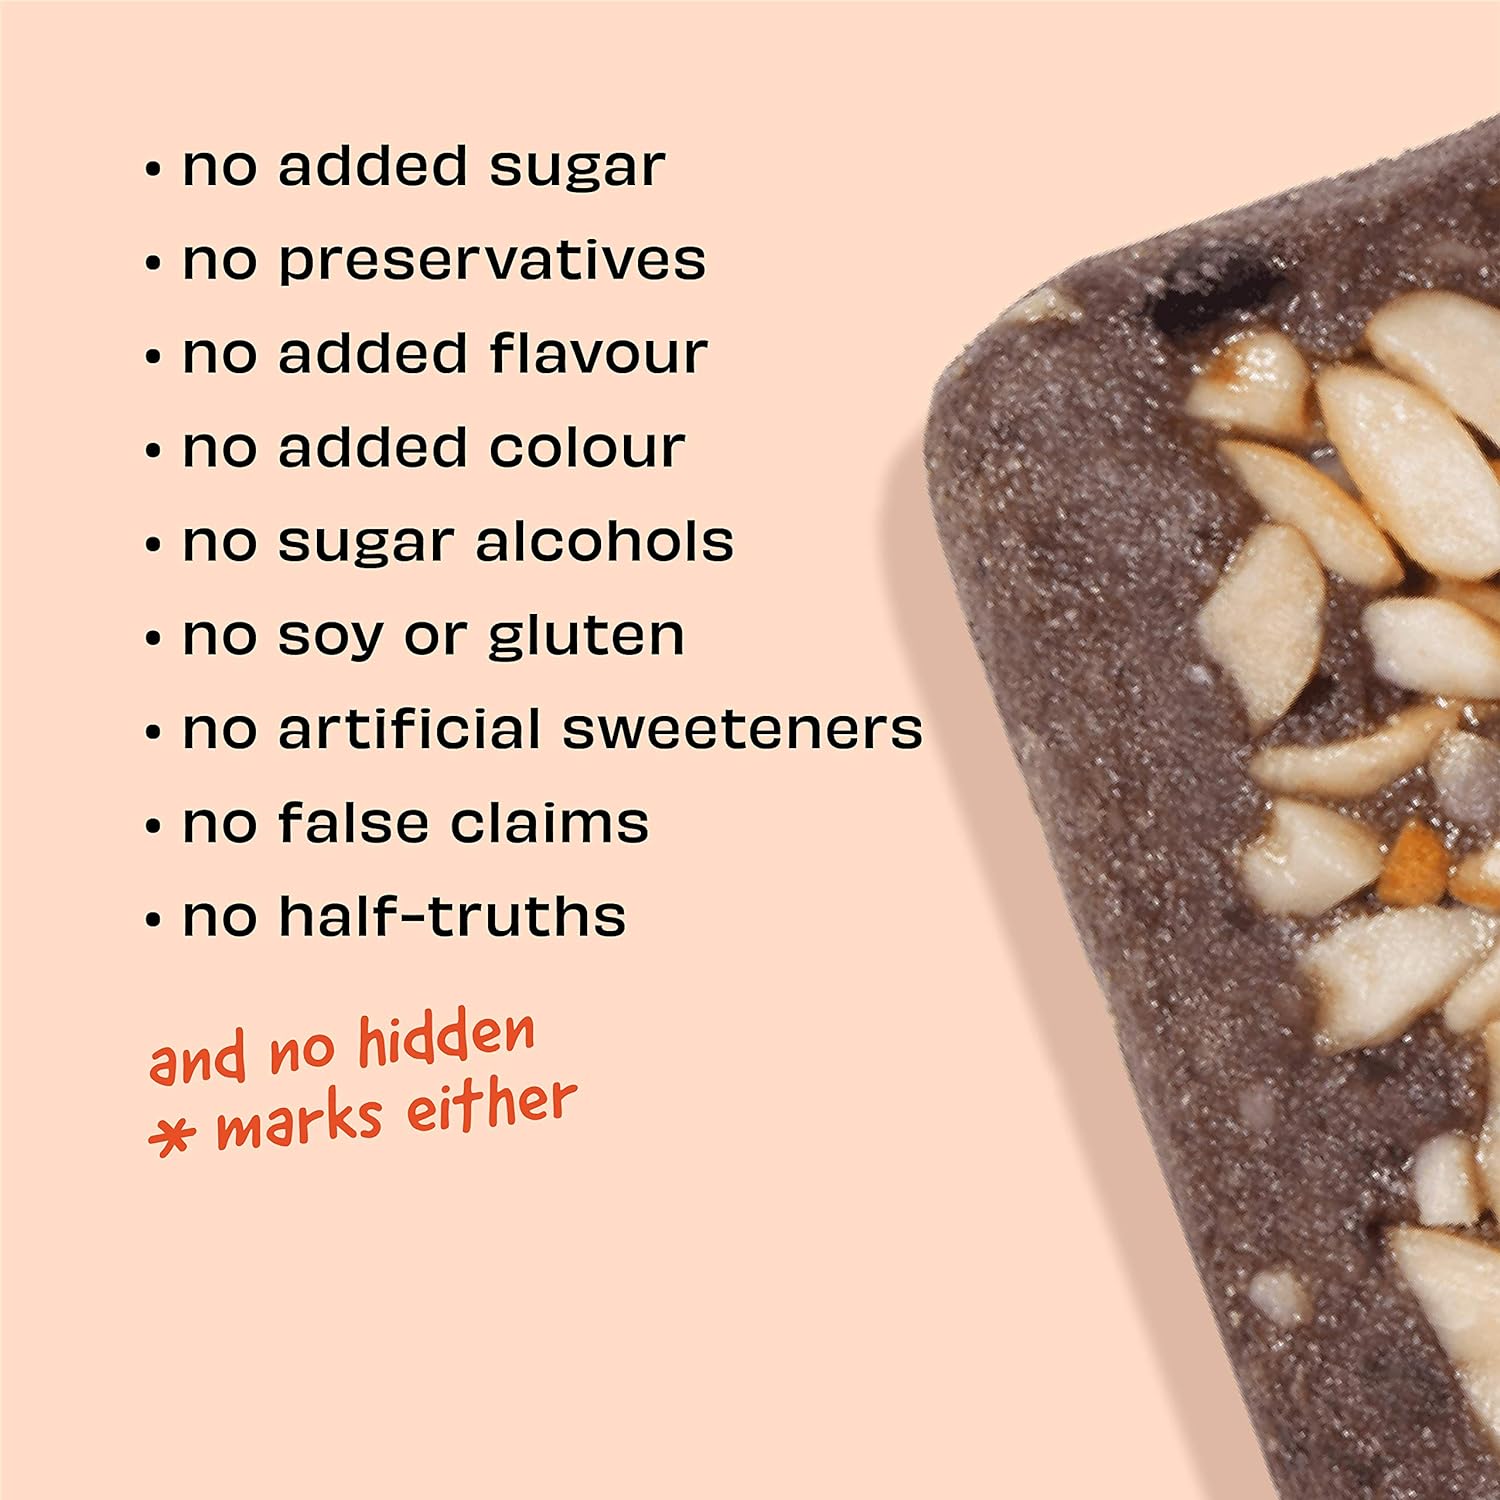 The Whole Truth - Mini Protein Bars - Peanut Cocoa - Pack of 8-8 x 27g - No Added Sugar - All Natural